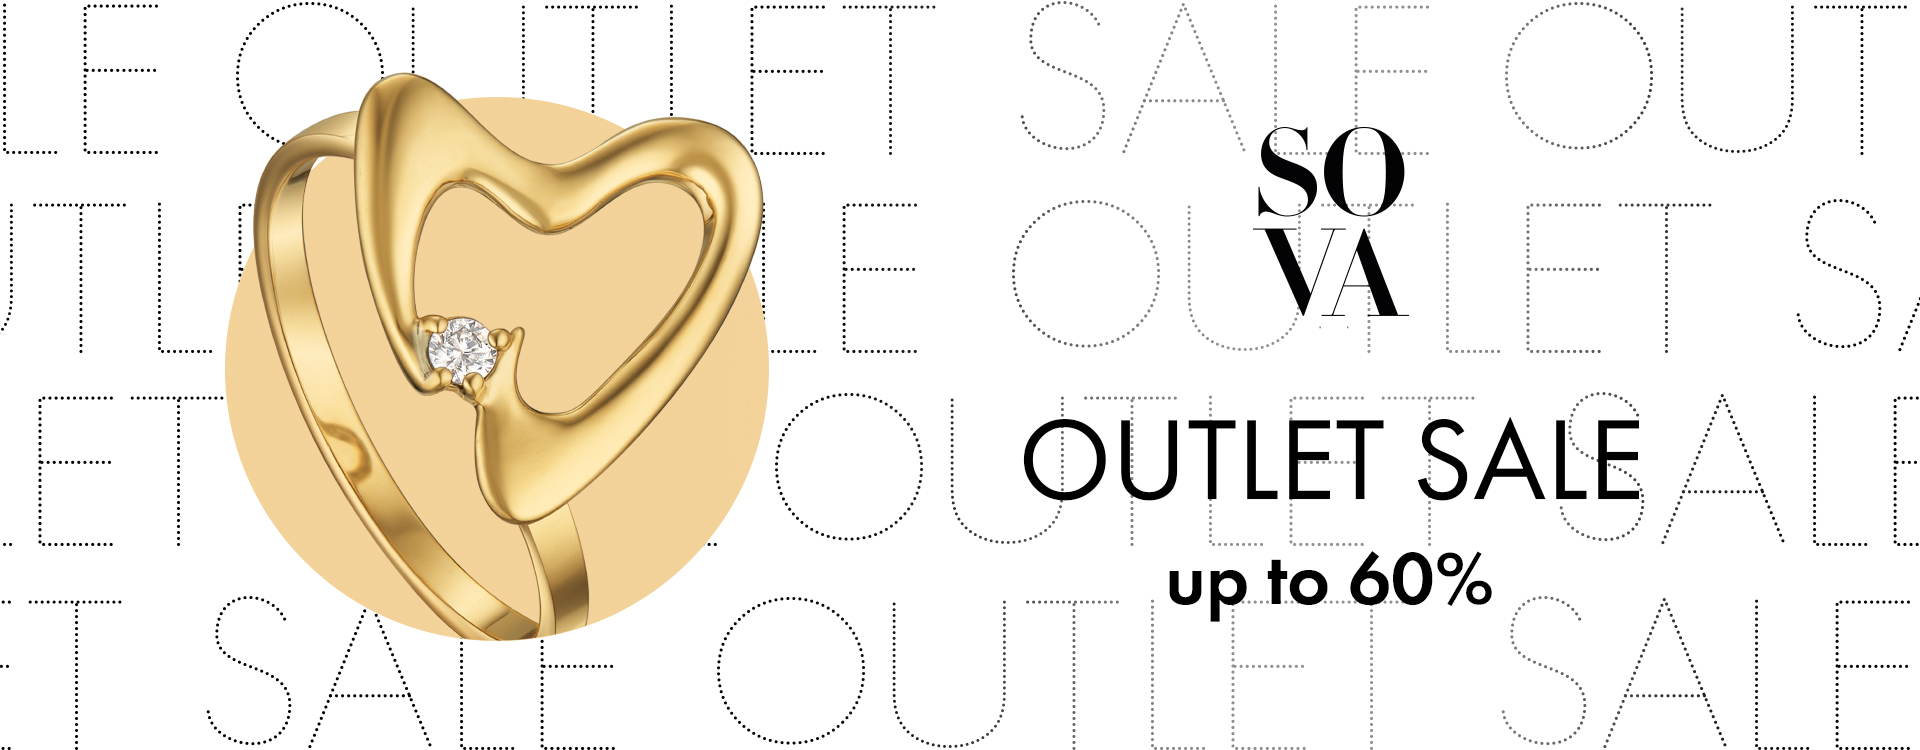 Outlet Sale up to 60% in SOVA